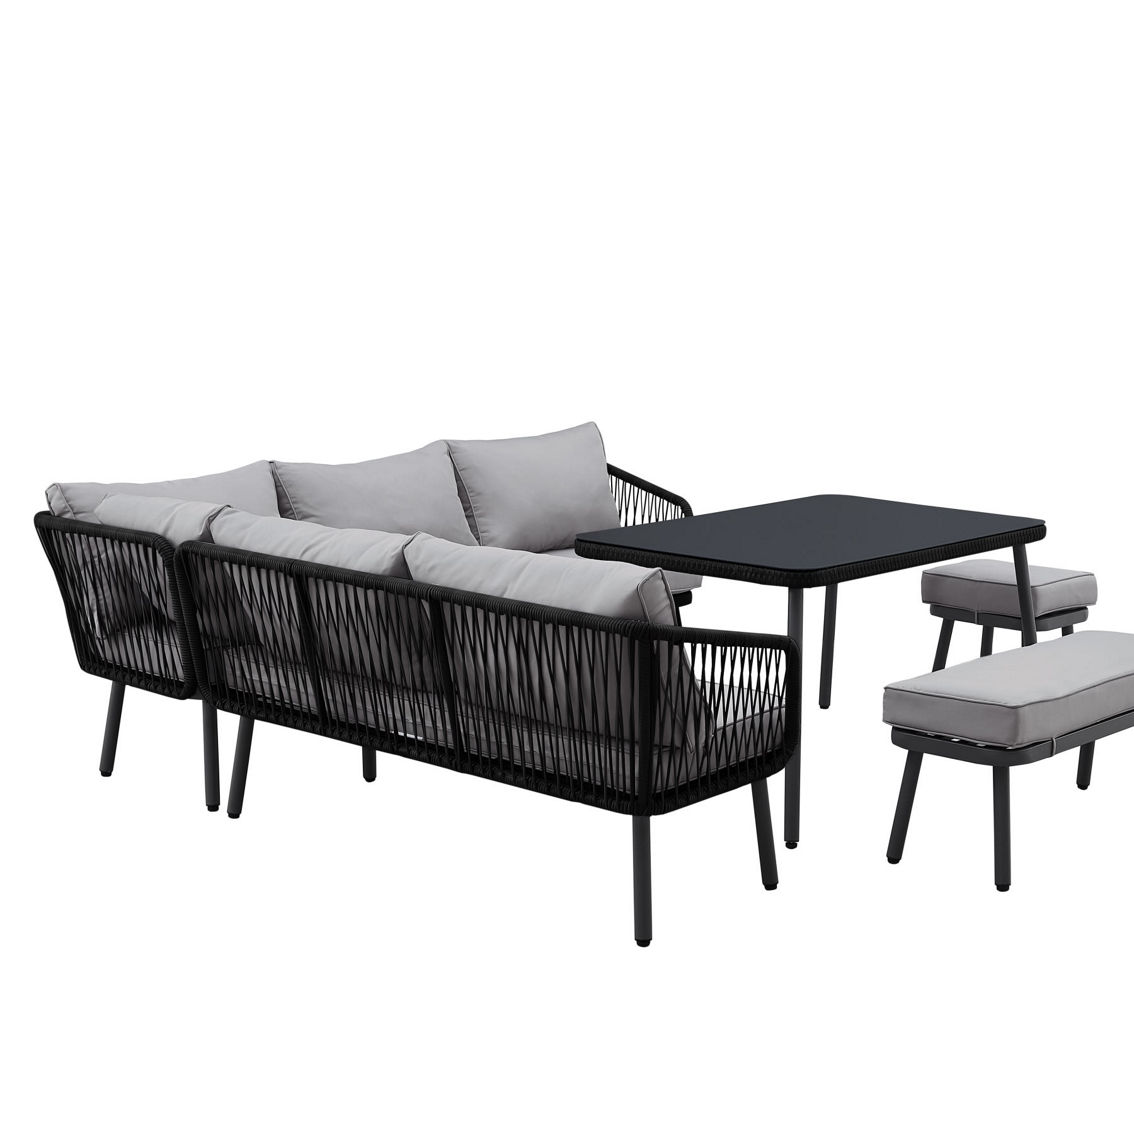 Inspired Home Razan Outdoor Rattan Wicker 5pc Seating Group - Image 4 of 5